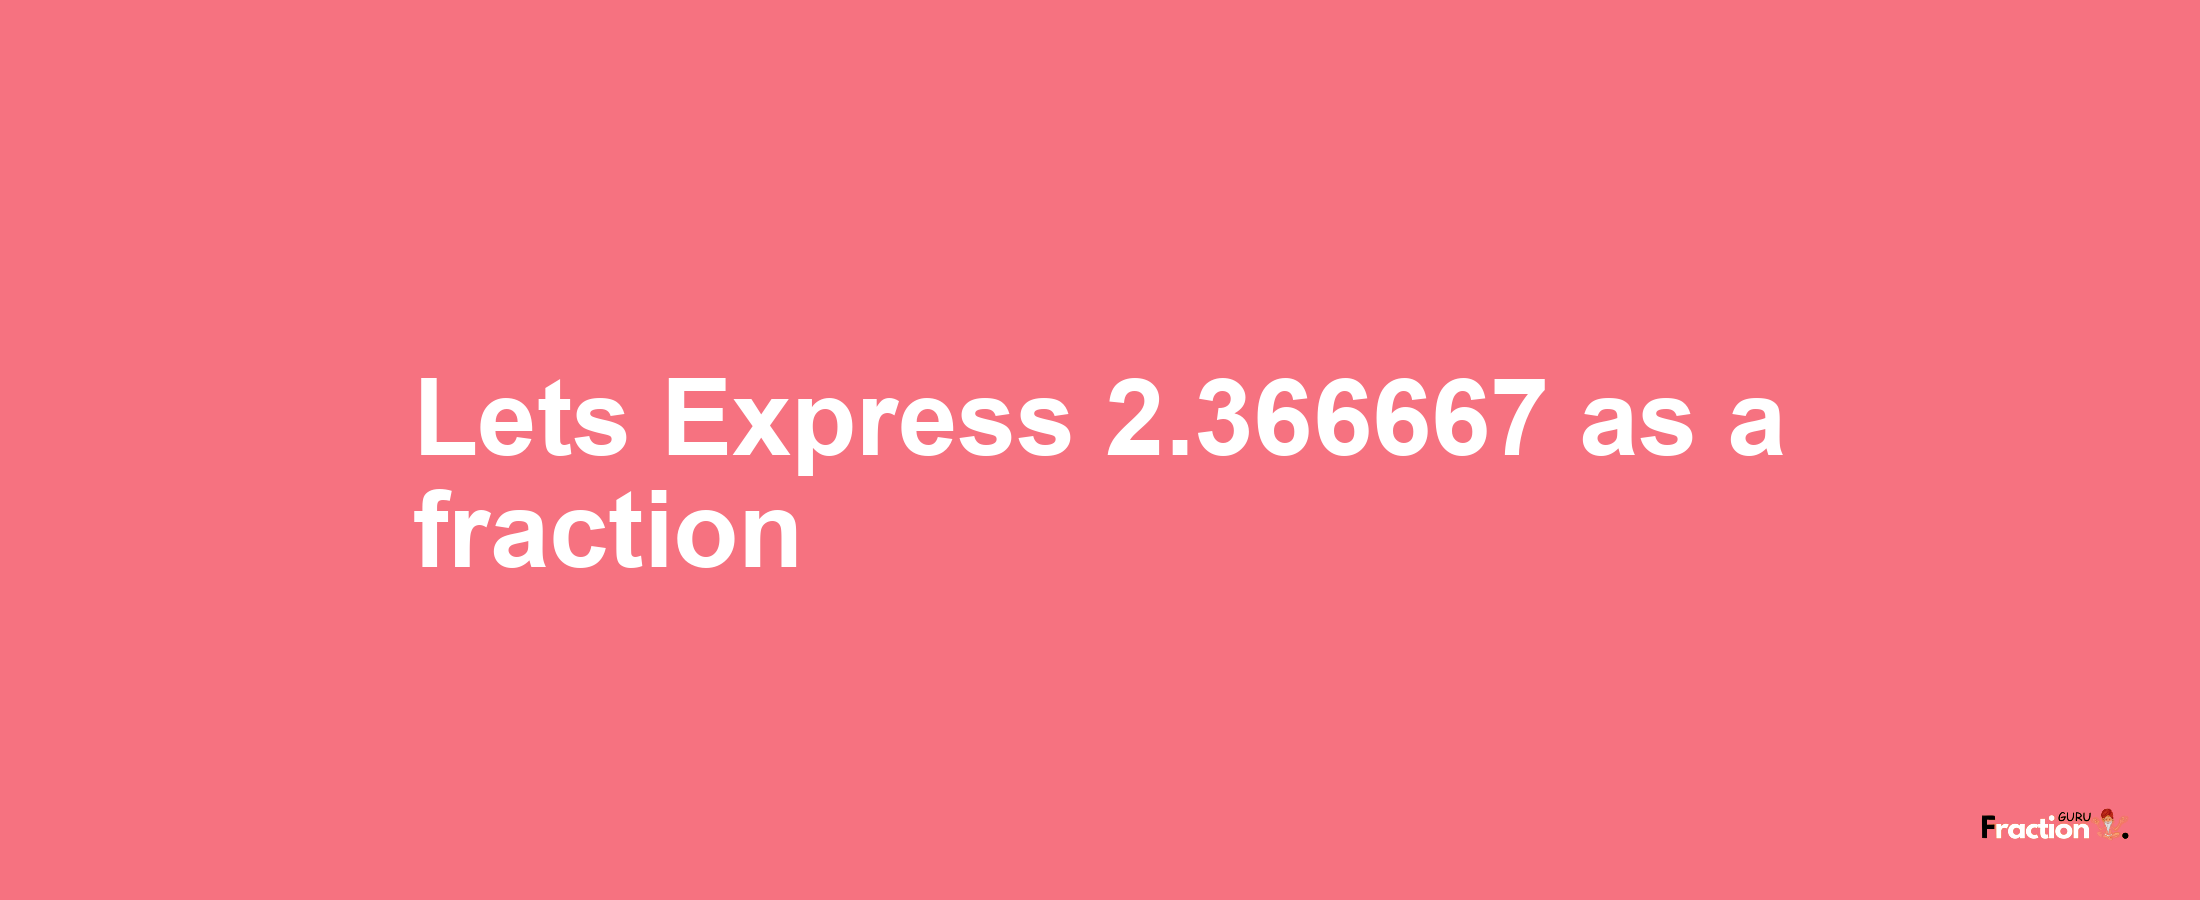 Lets Express 2.366667 as afraction